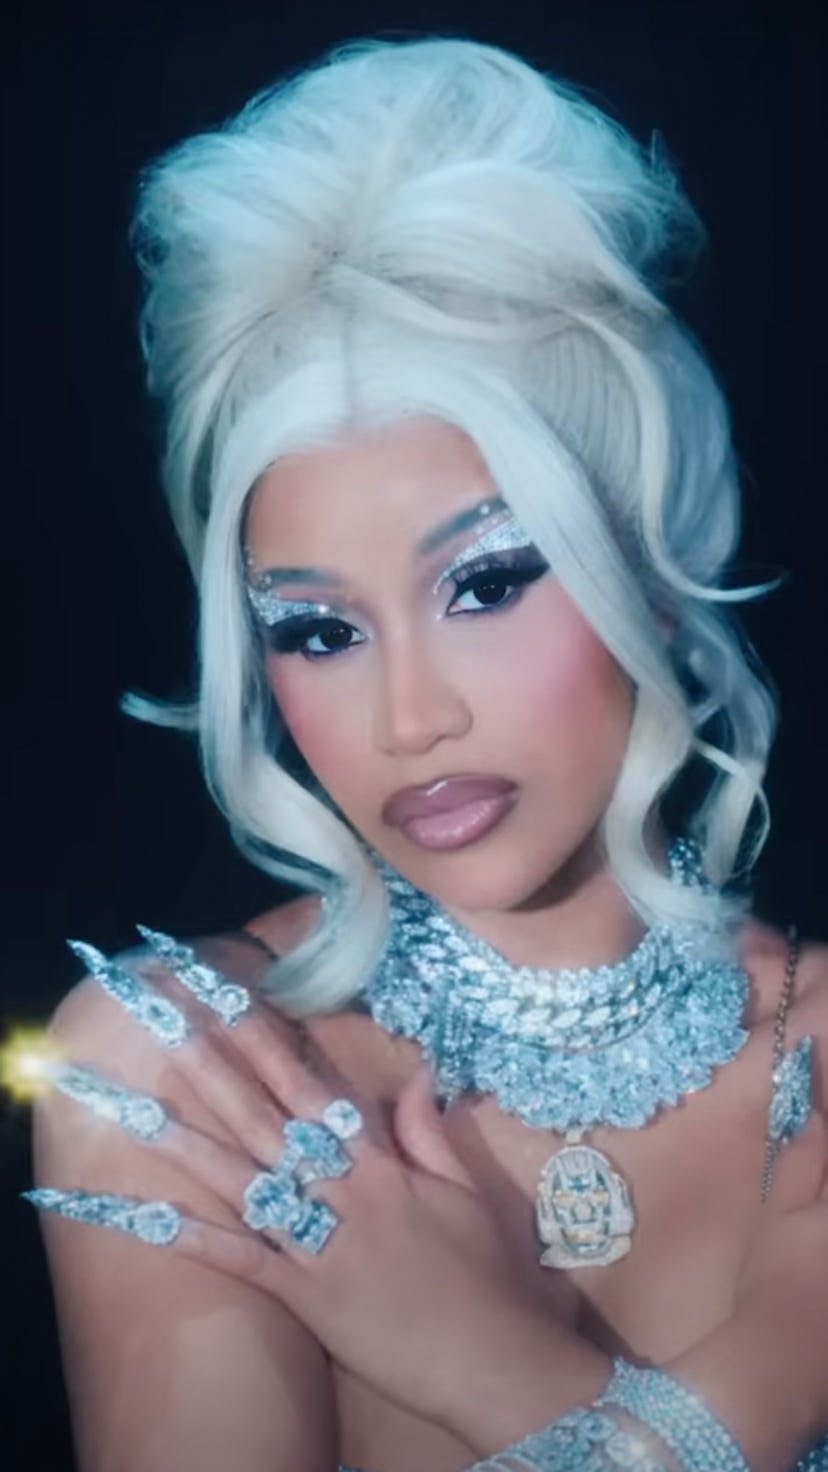 Cardi B released a music video for her fiery single, "Hot Sh*t," featuring Lil Durk and Kanye West o...